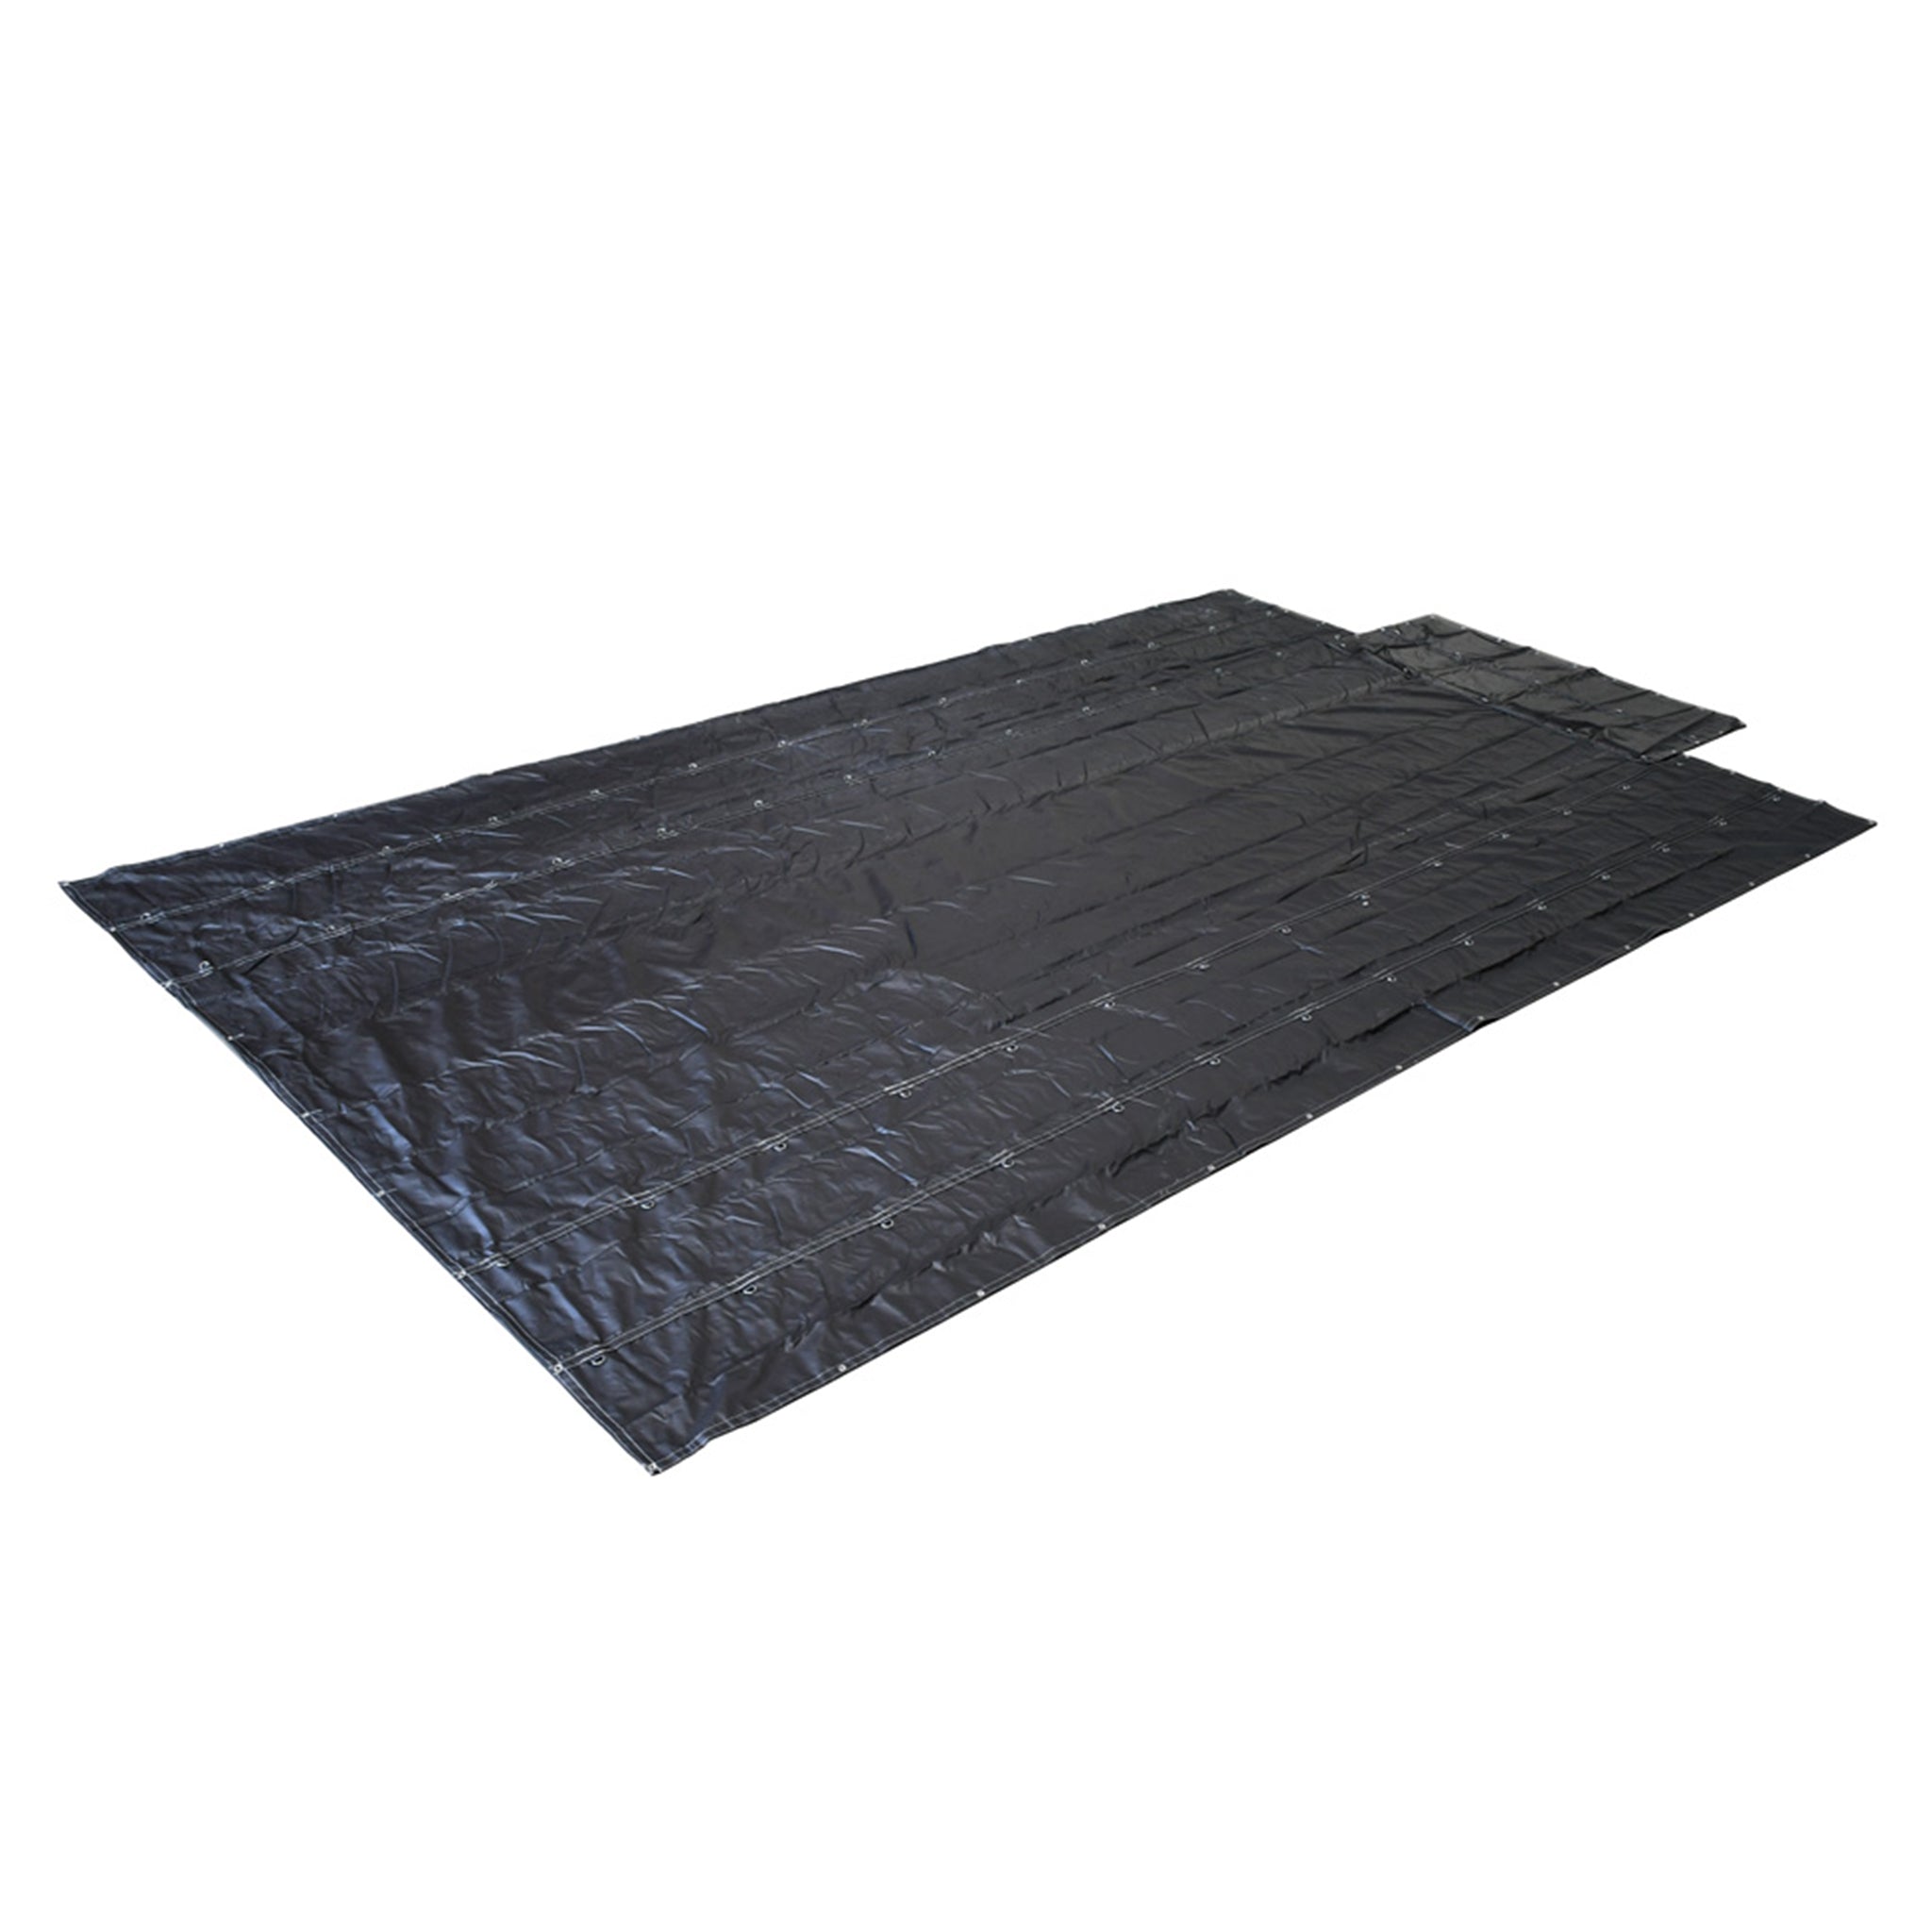 Weather-Resistant Tarps for Protecting Your Assets – Tarps & Tie-Downs